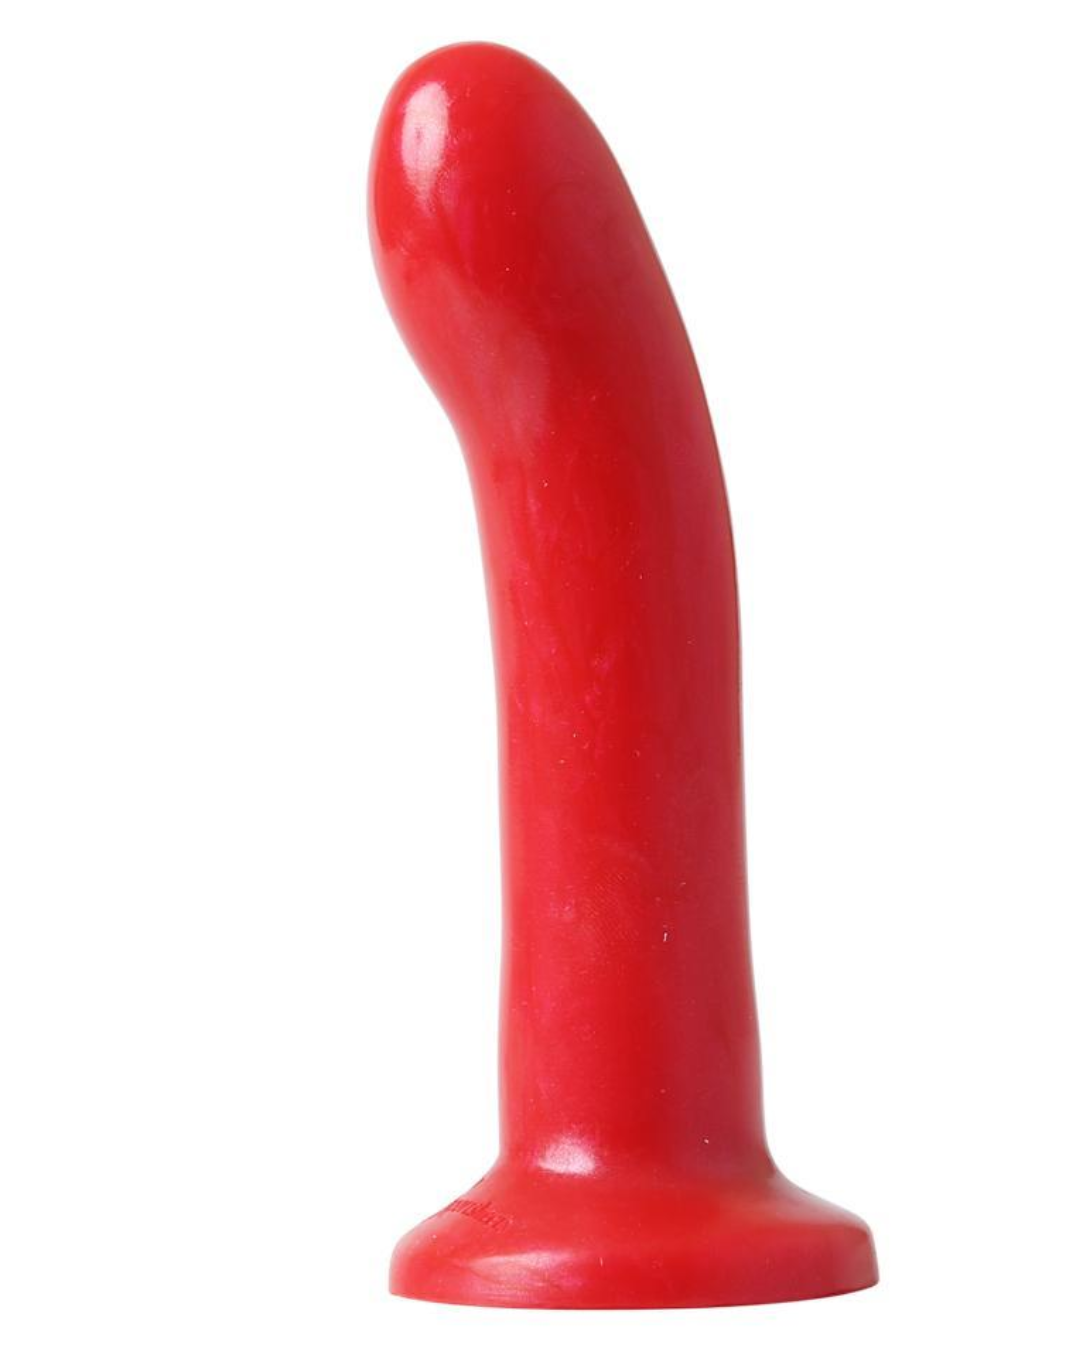 Flare Smooth Silicone 5.5 Inch Anal Dildo by Sportsheets side view